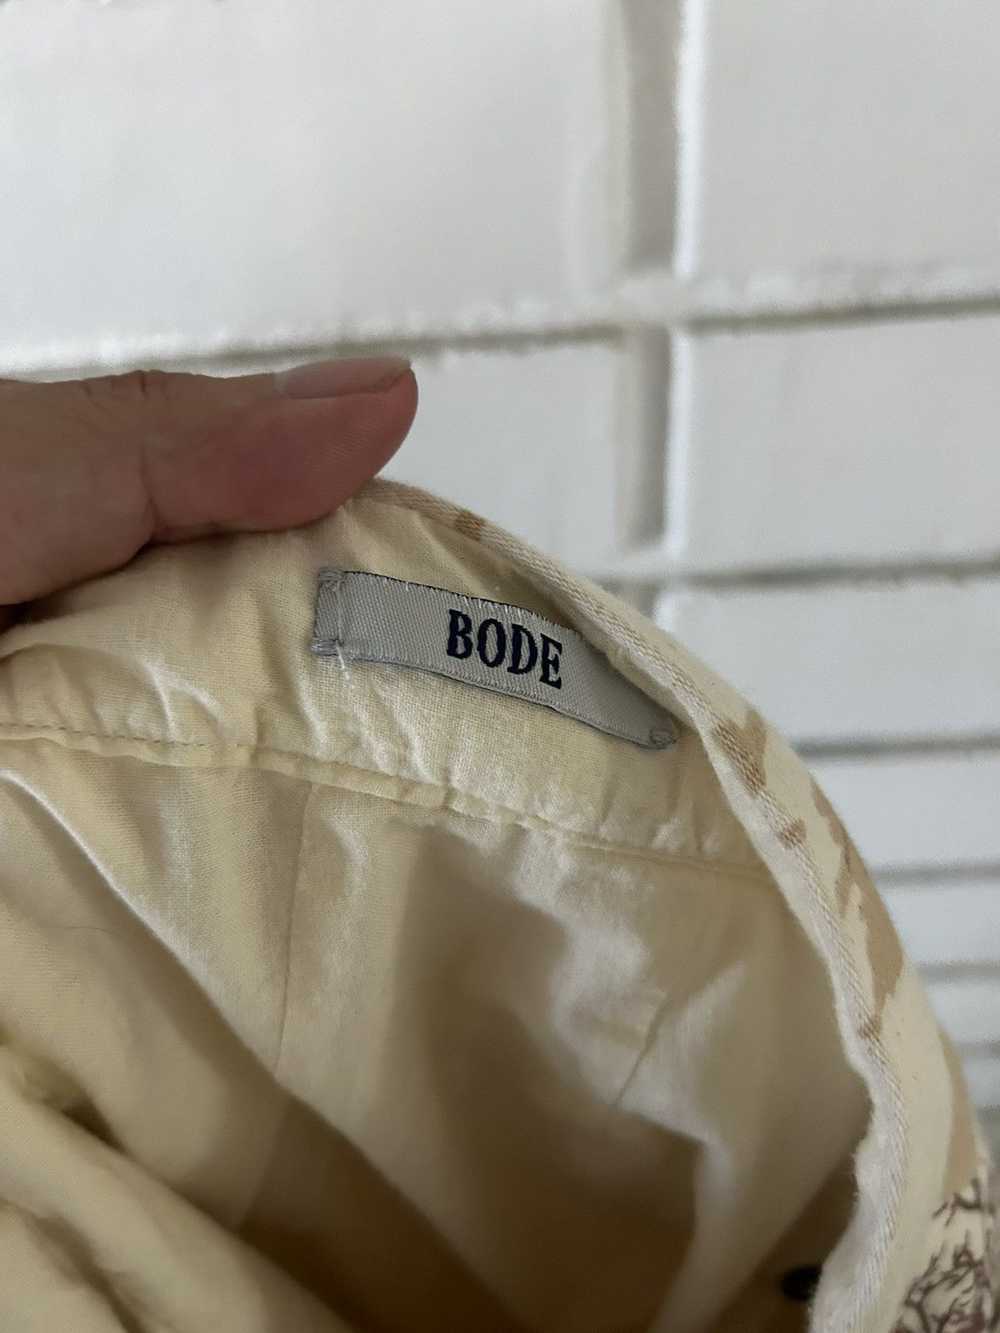 Bode Bode Dog Hunting Trousers (sz34) - image 3